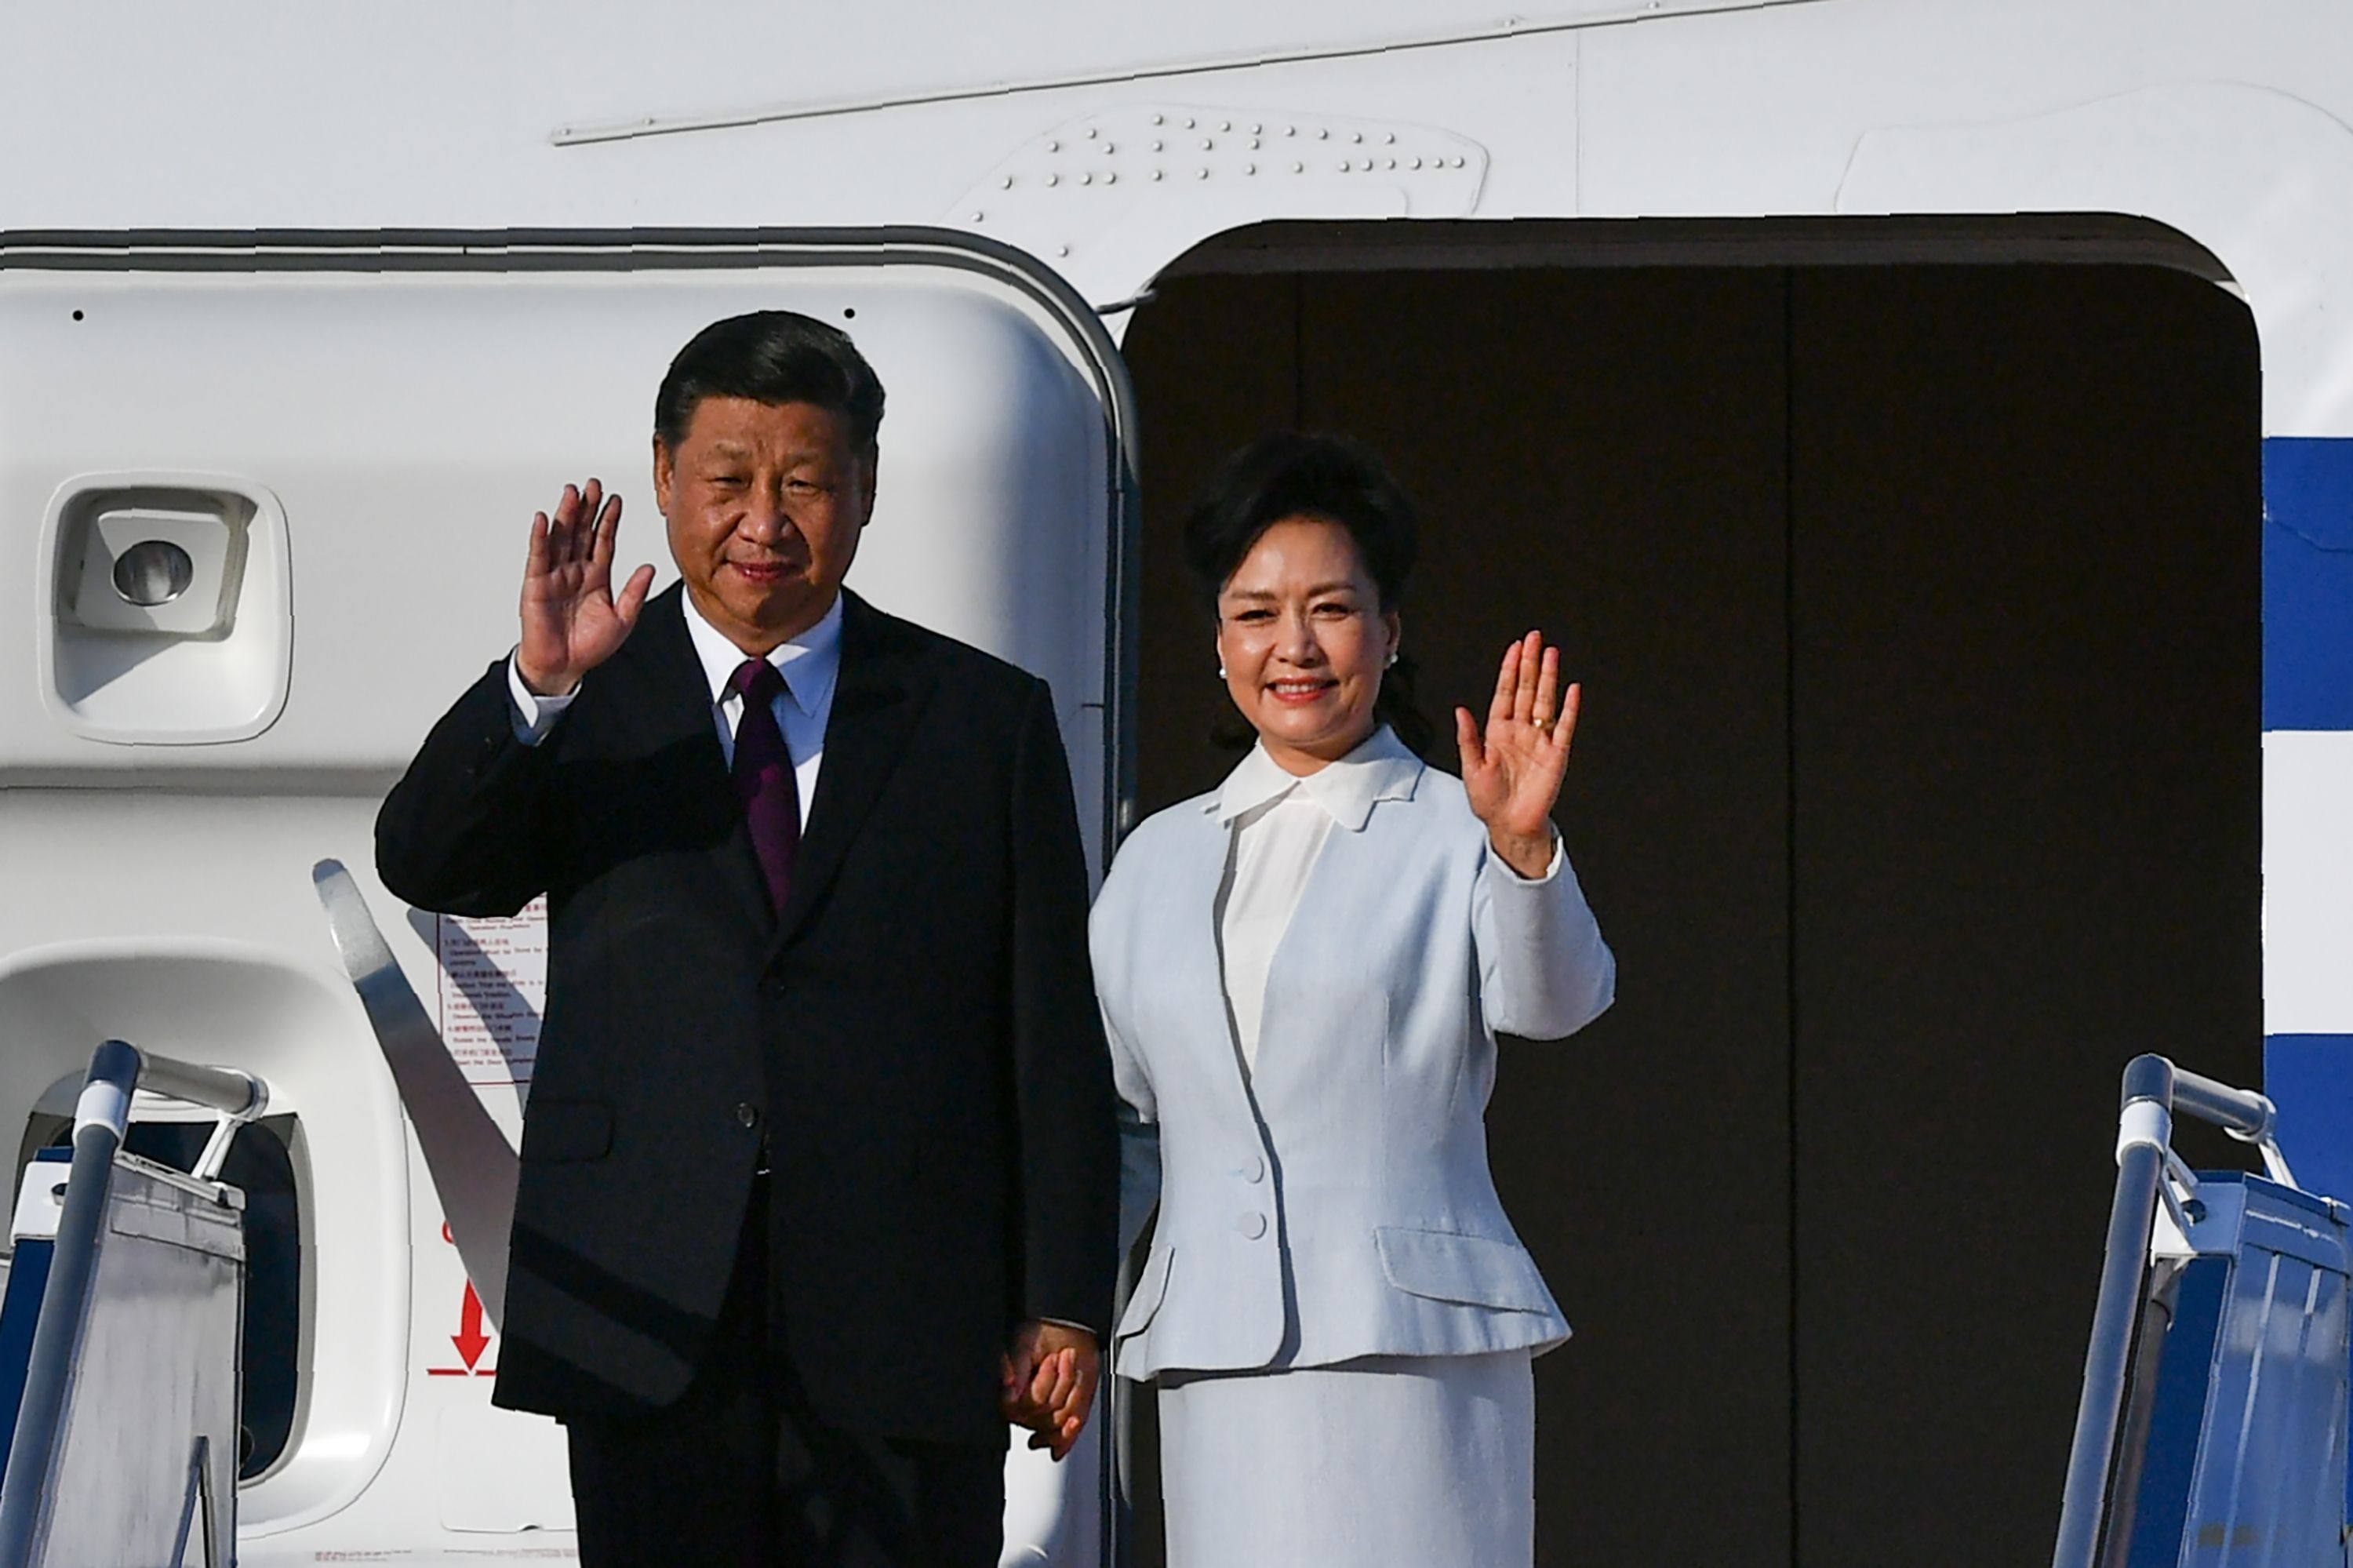 China’s first lady Peng Liyuan is expected to join Chinese President Xi Jinping on his visit to Hong Kong this week. Photo: AFP